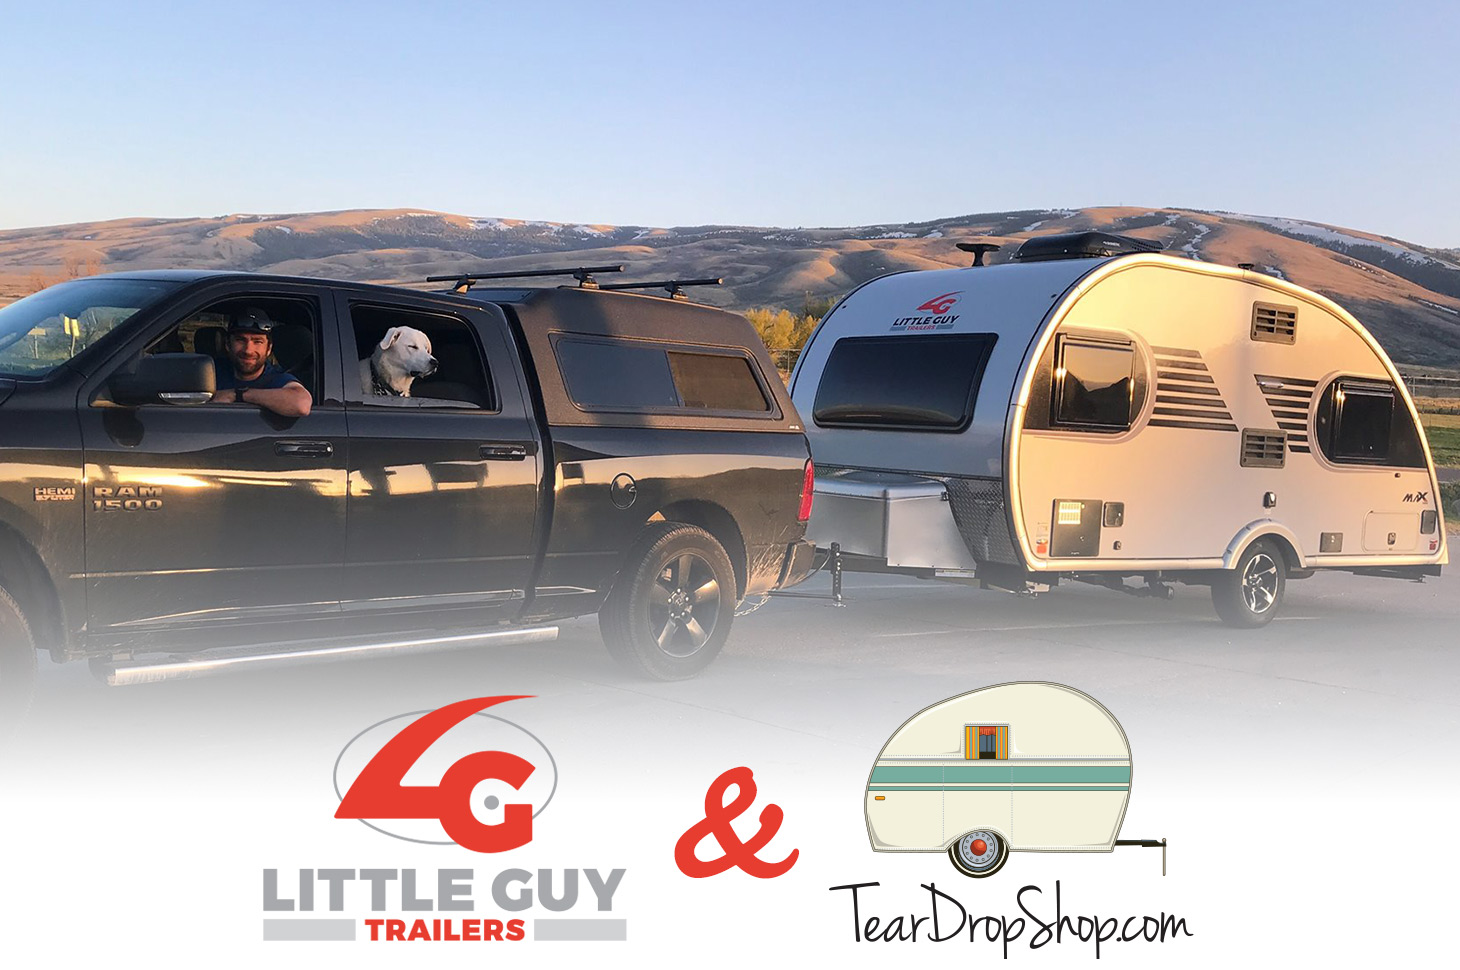 Little Guy and Teardrop Shop Video Contest Giveaway